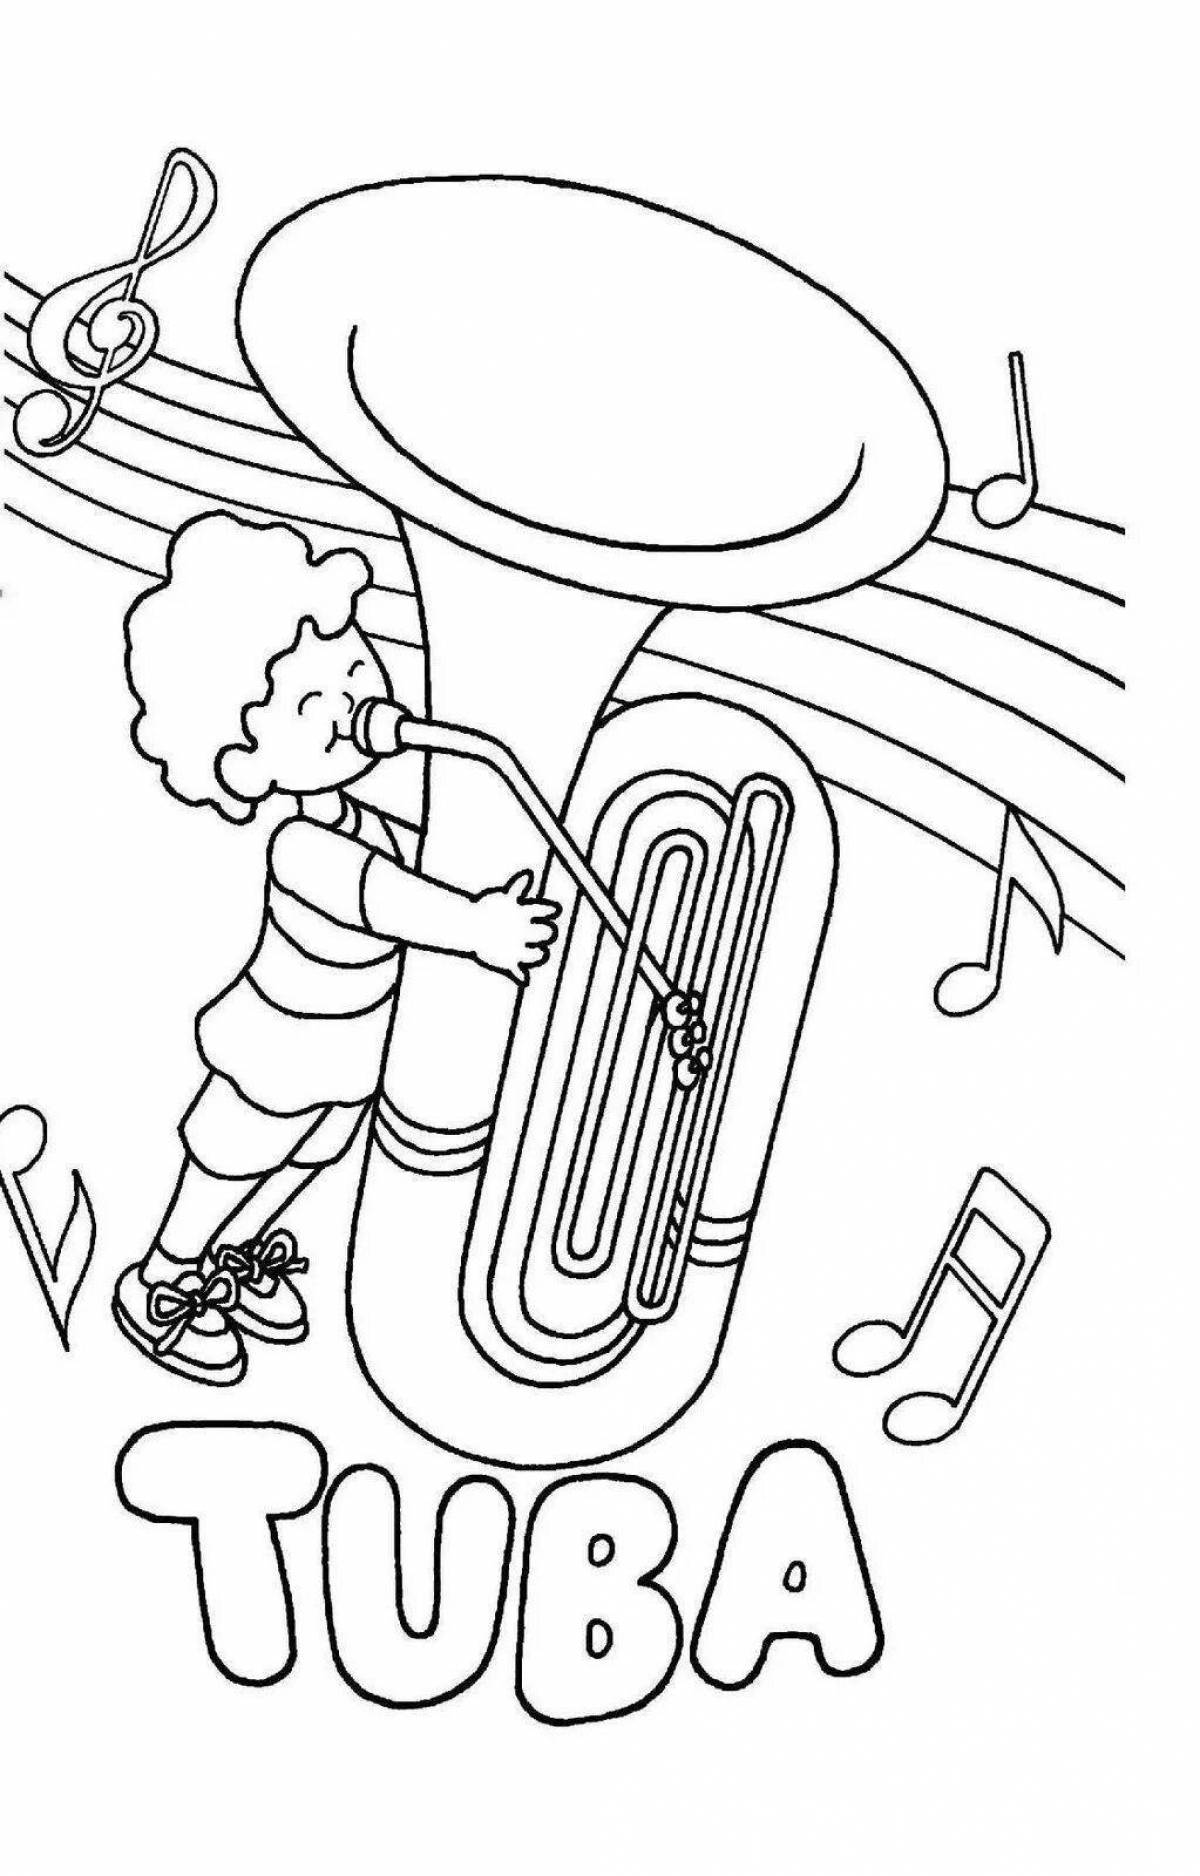 Playful musical coloring book for kids